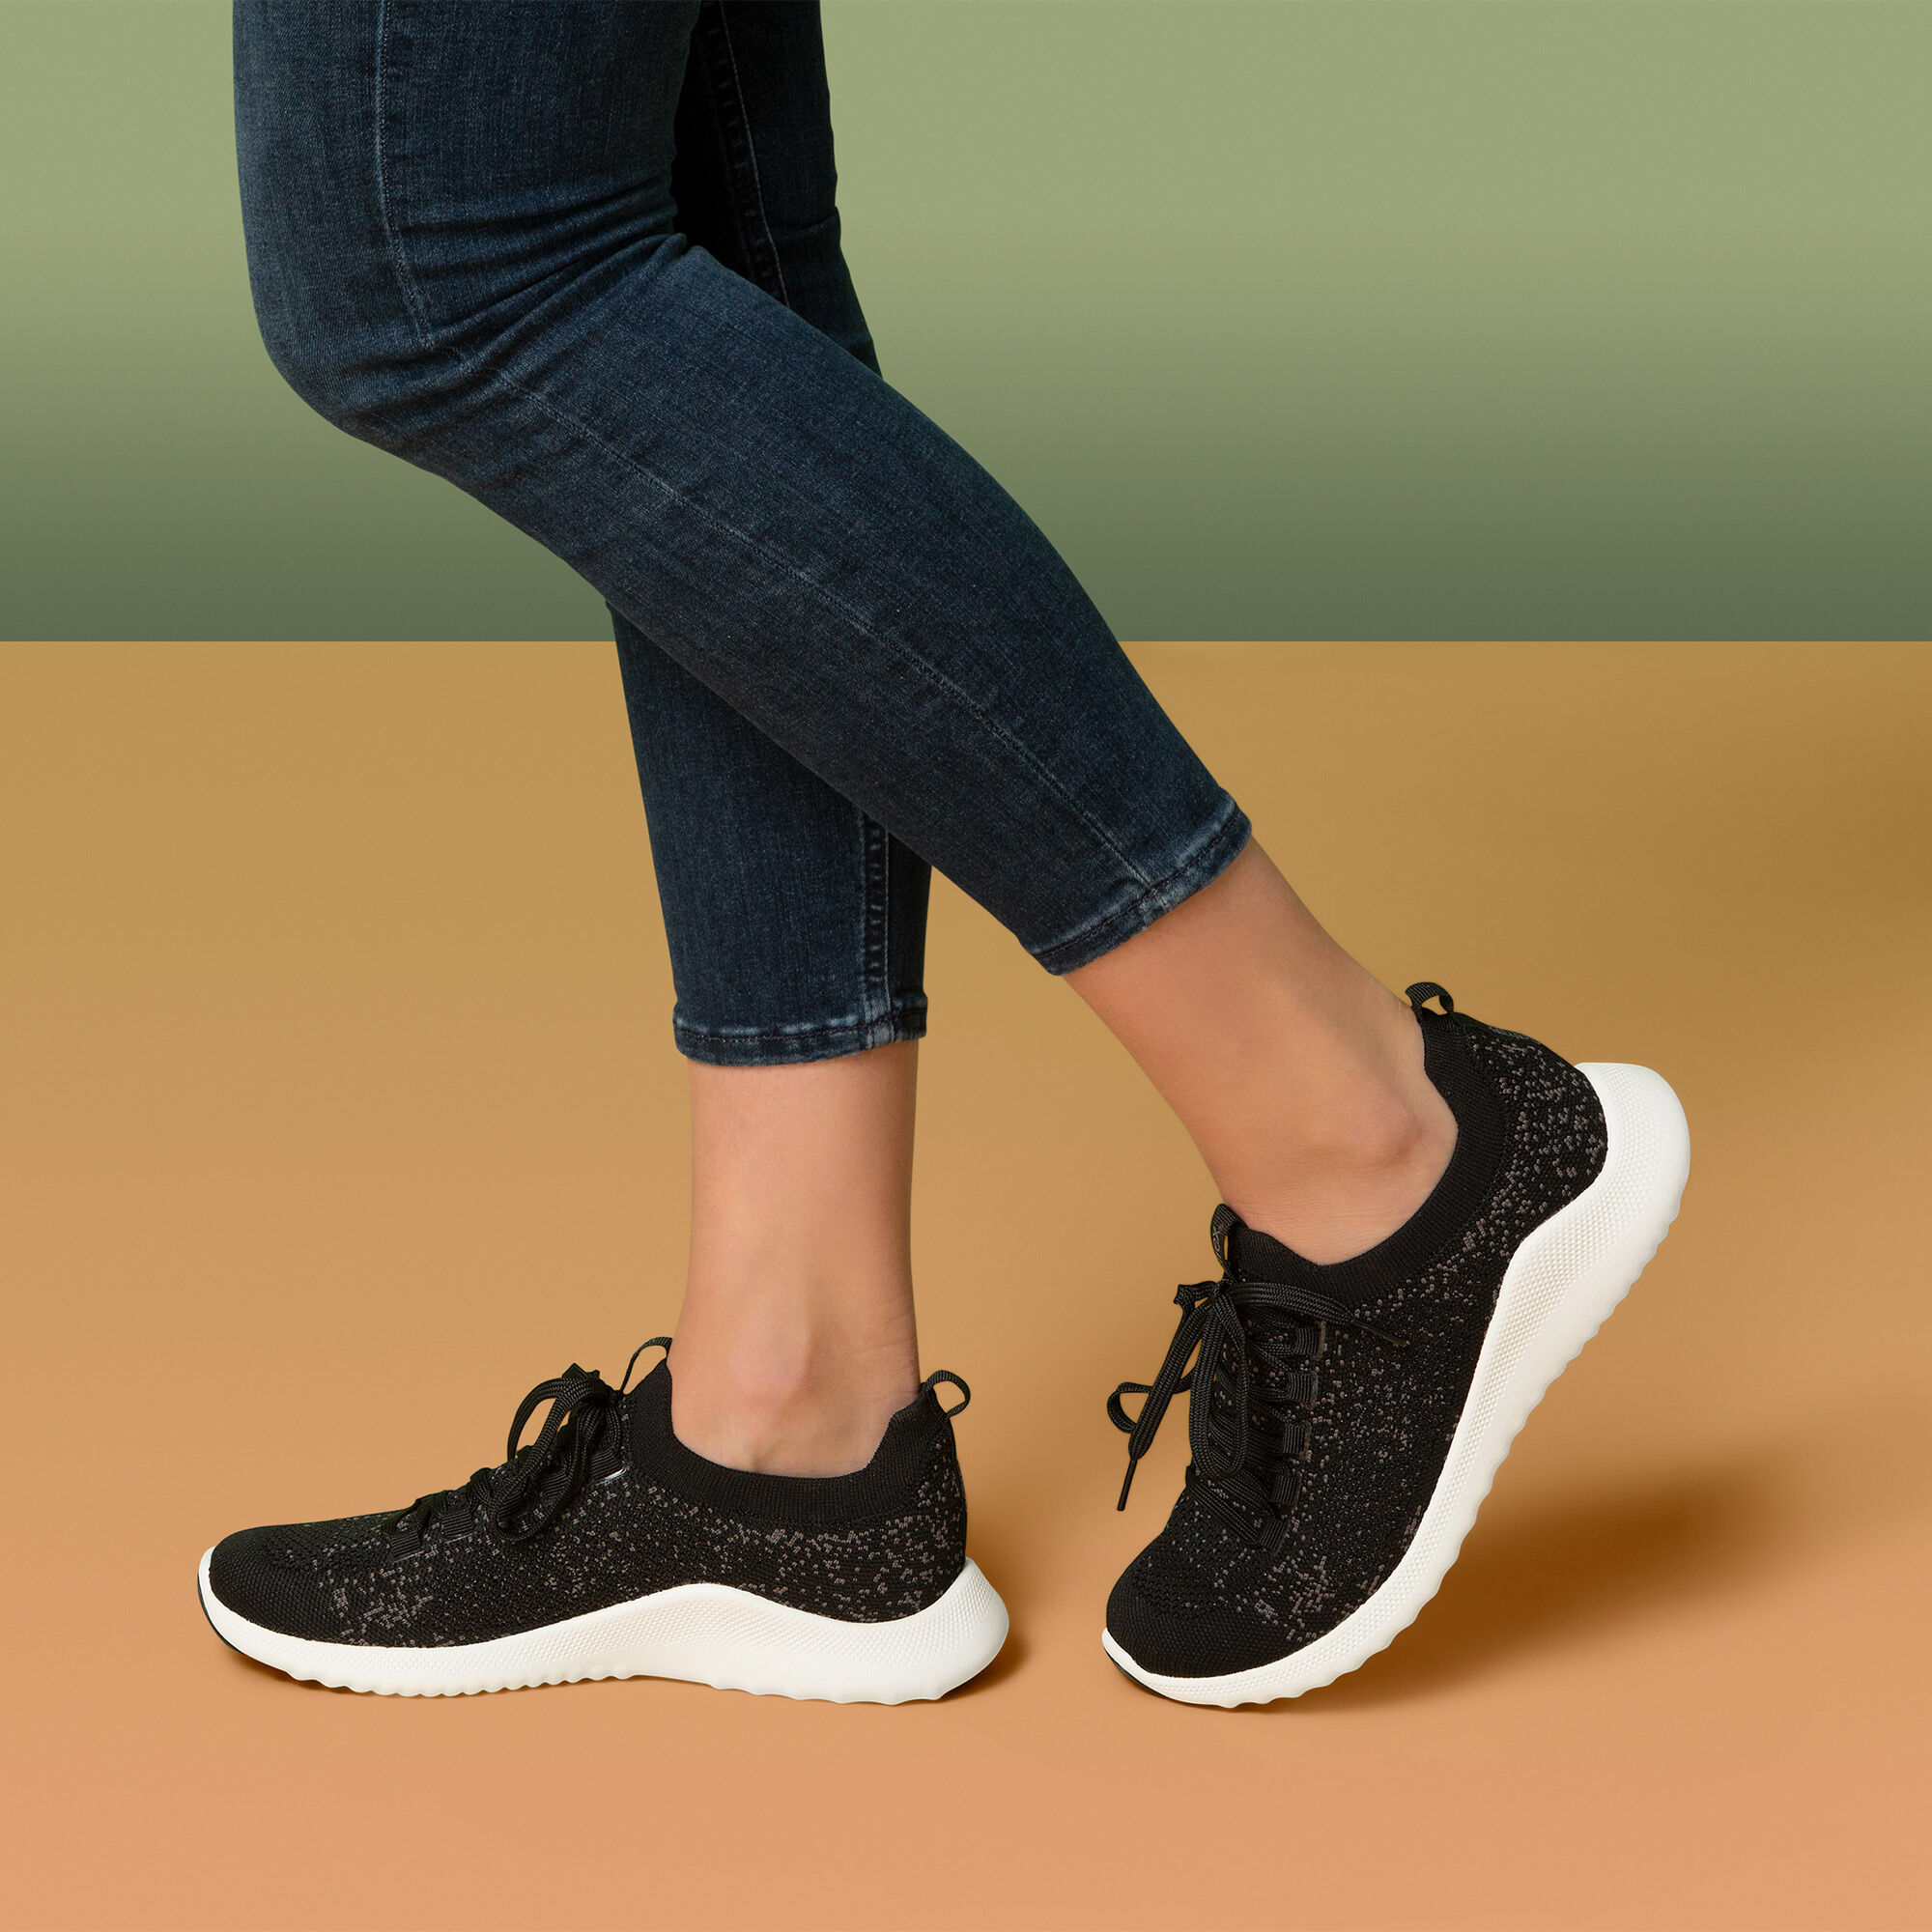 sneakers that have arch support